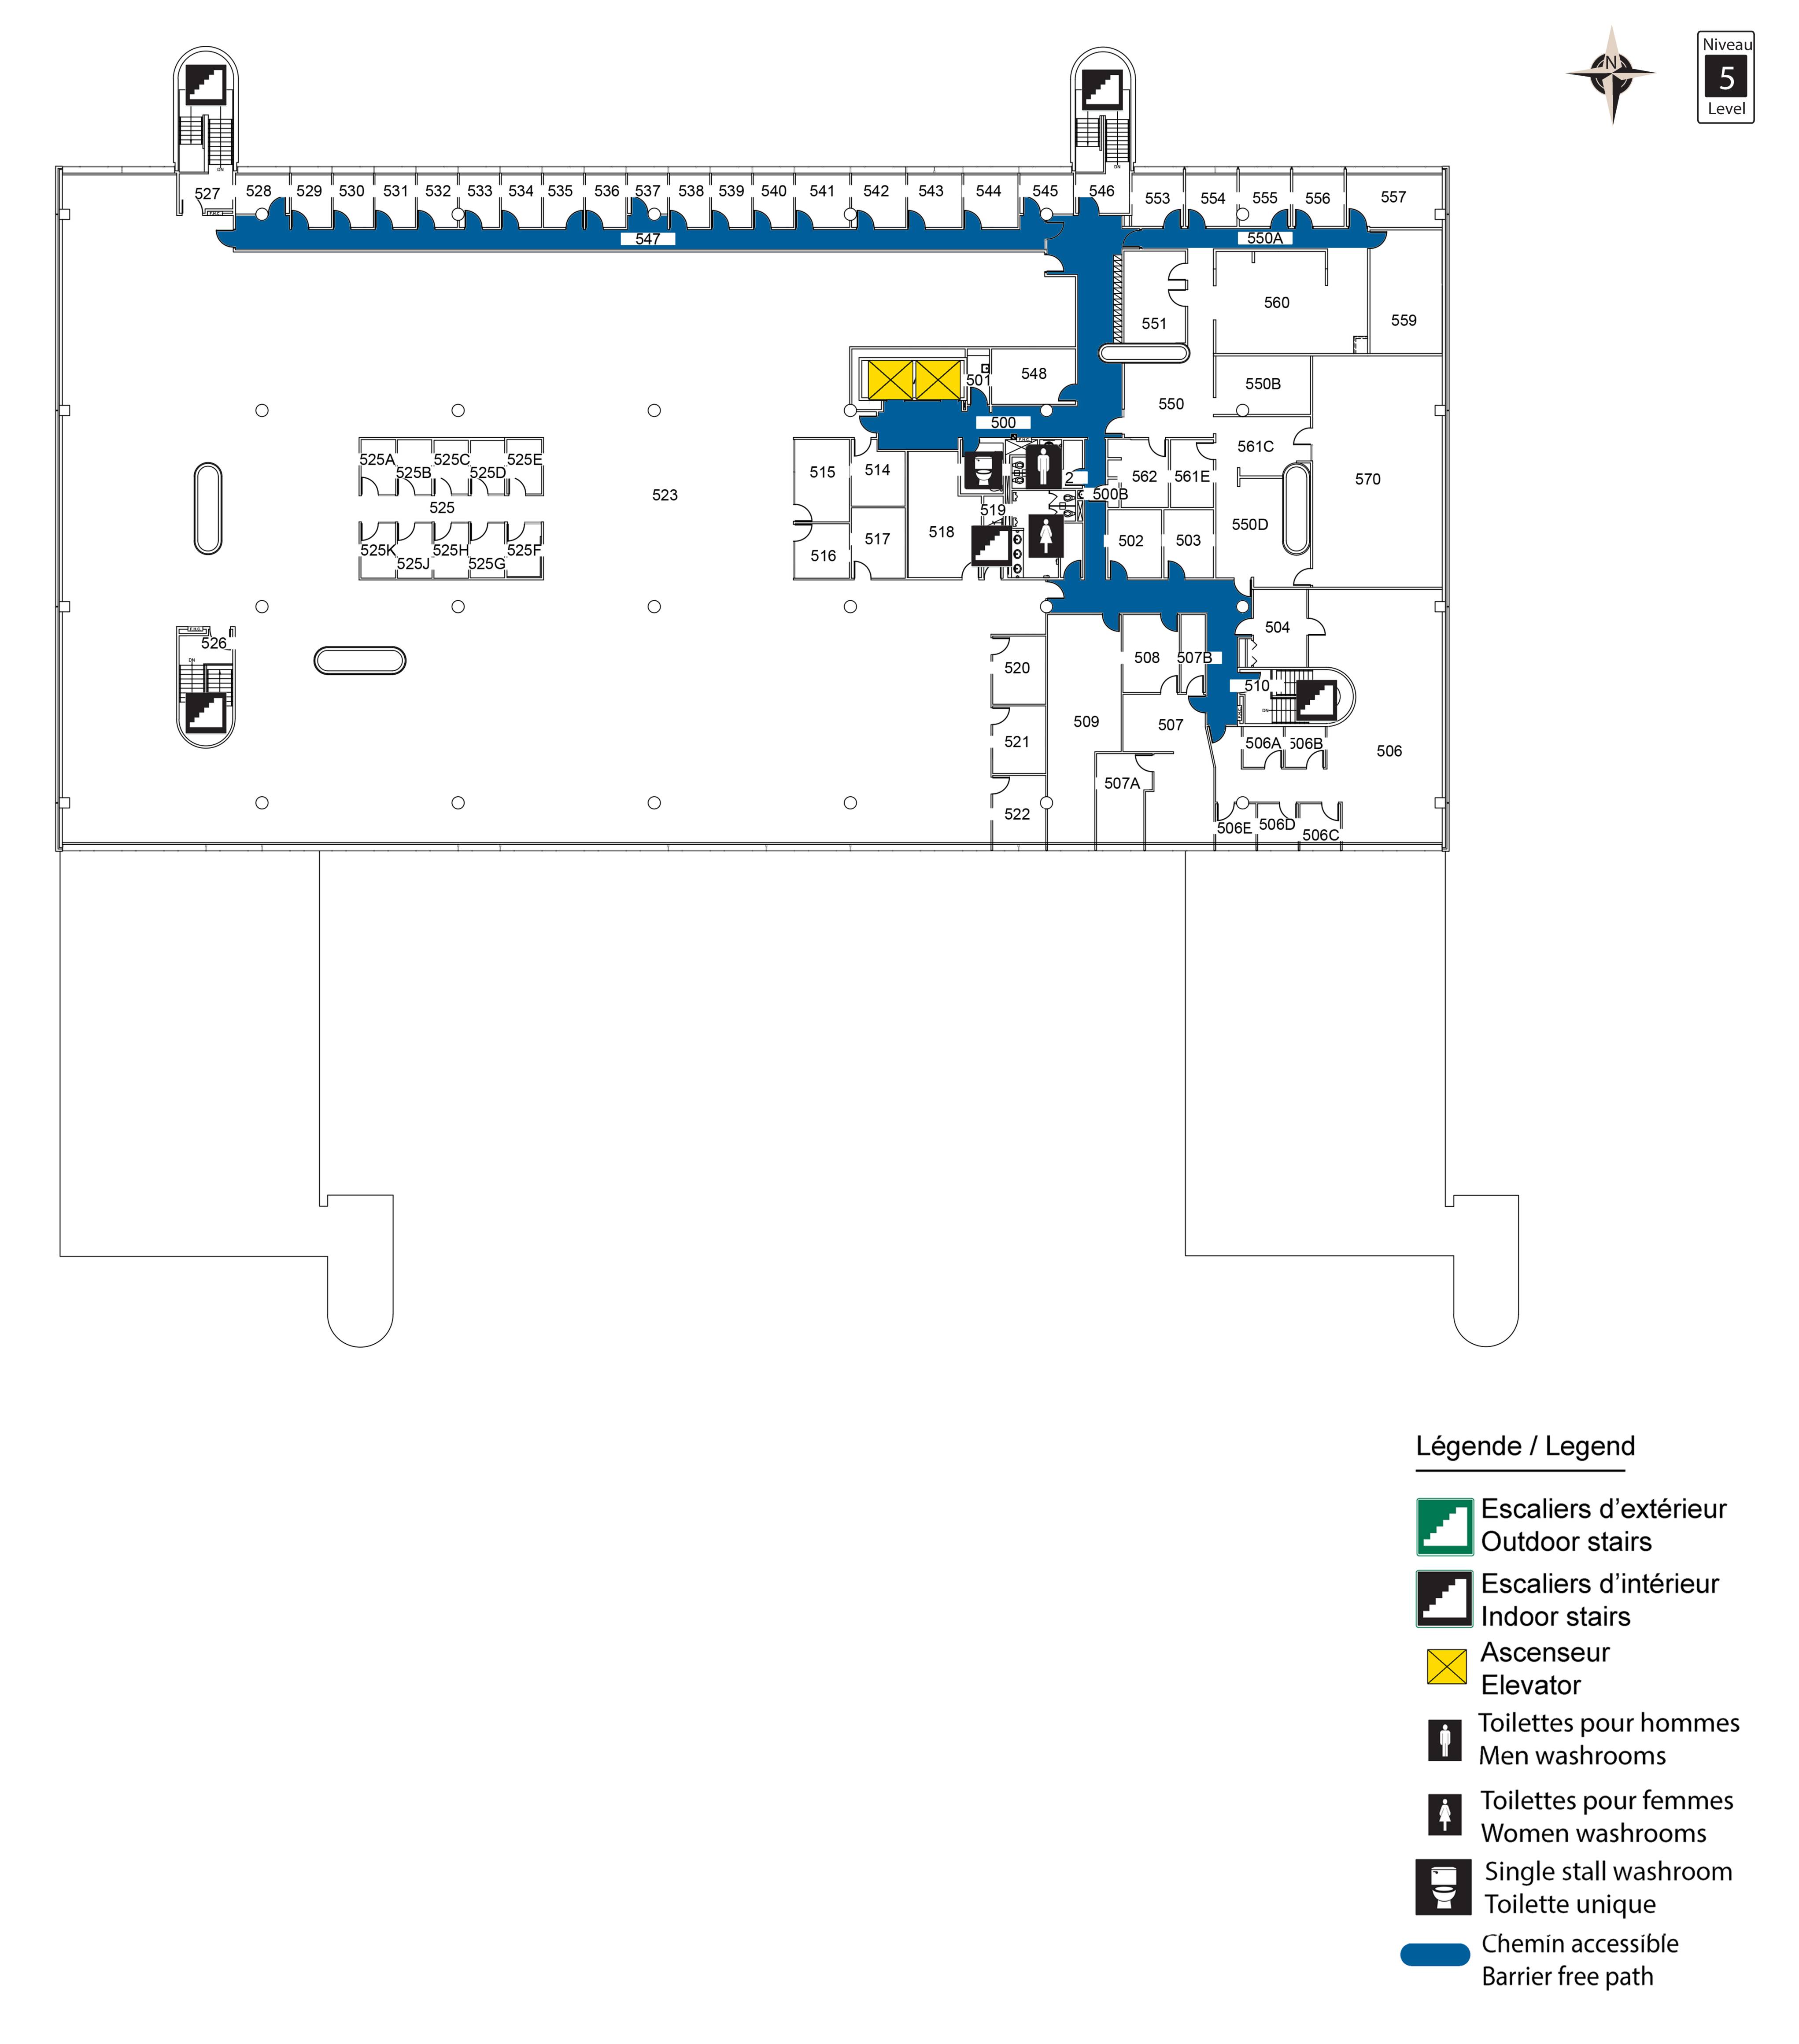 Accessible map - FTX level 5